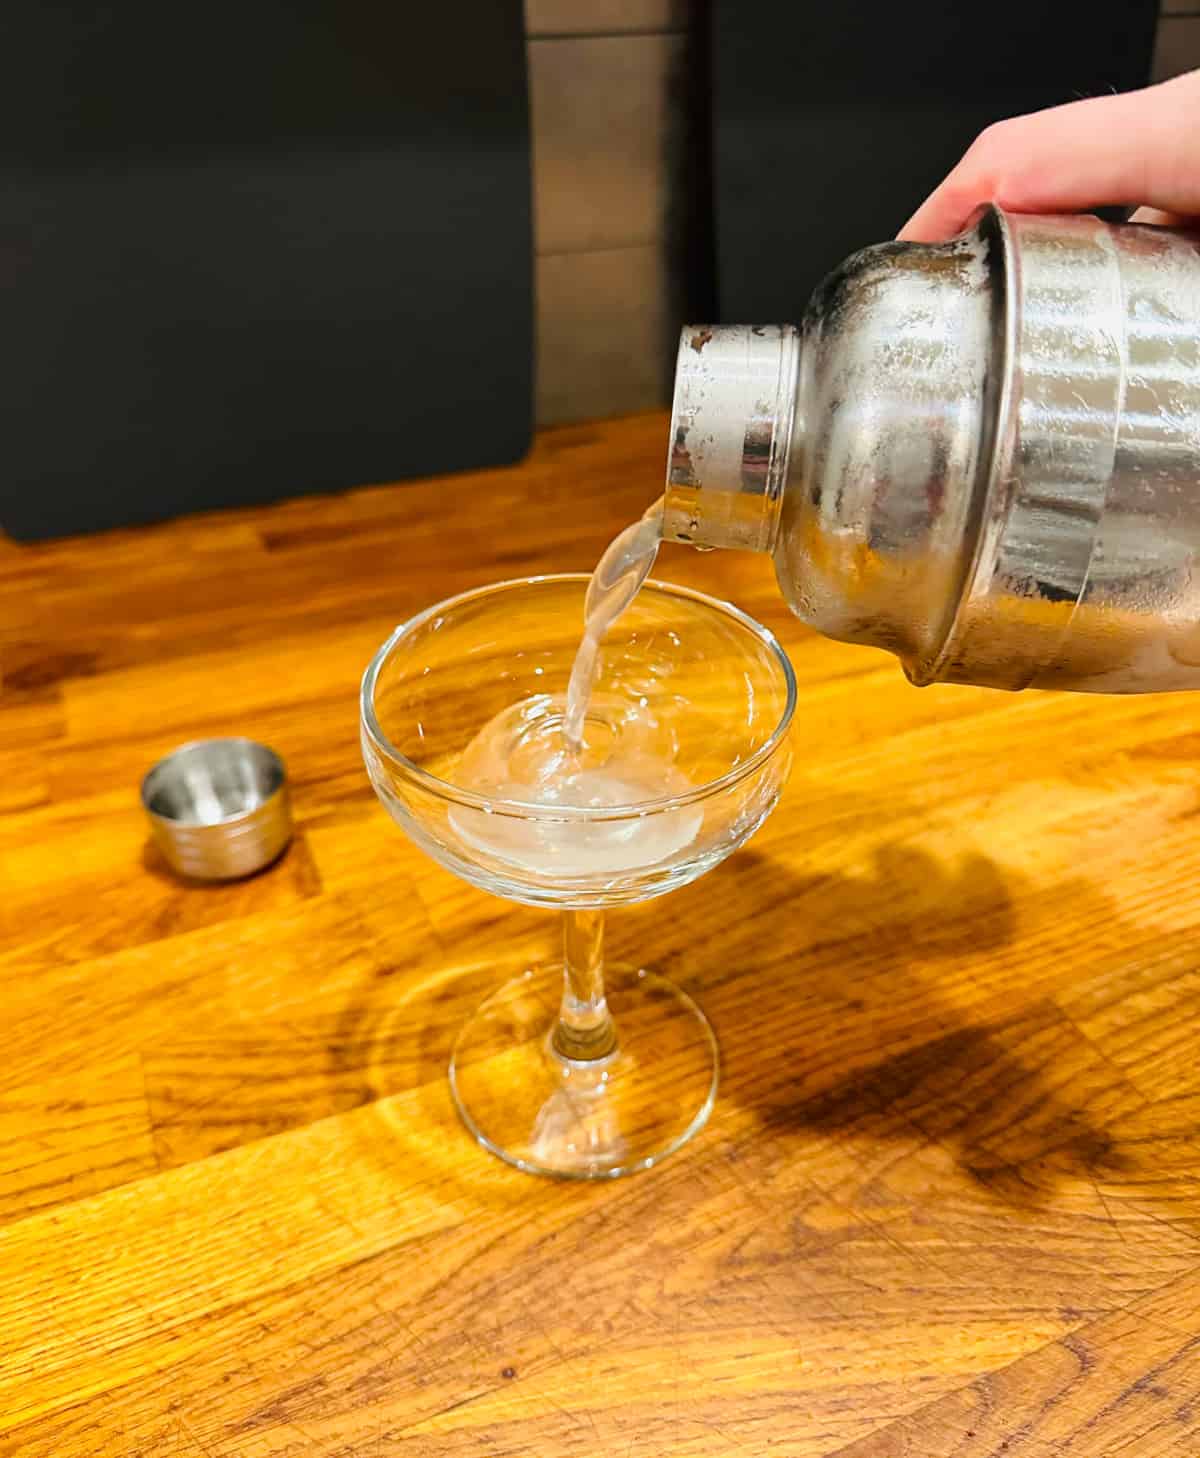 Ginger martini being poured from a cocktail shaker into a coupe glass.